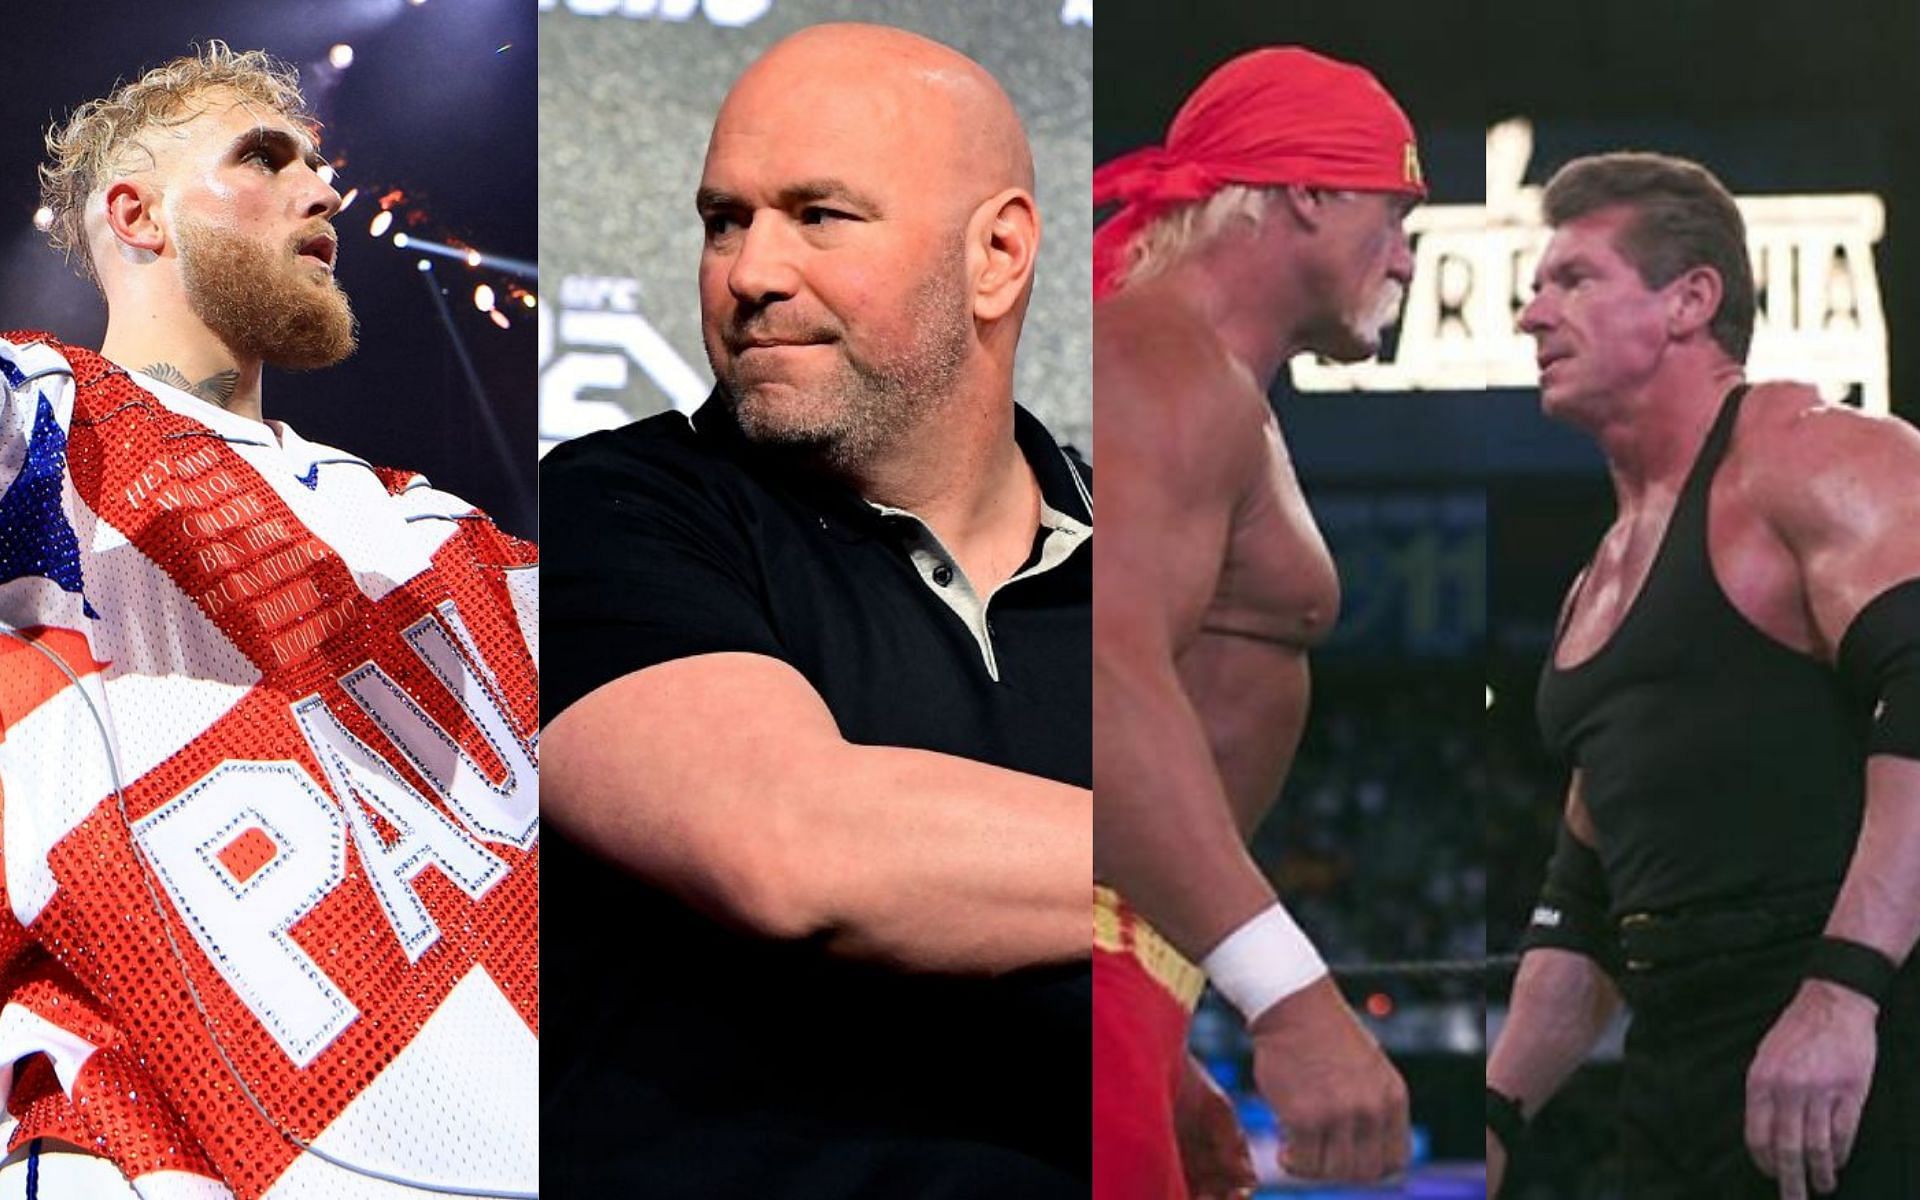 Chael Sonnen compared the beef between Jake Paul and Dana White to the legendary rivalry between Hulk Hogan and WWE pioneer Vince McMahon [Credits: @WWE_History via Twitter]